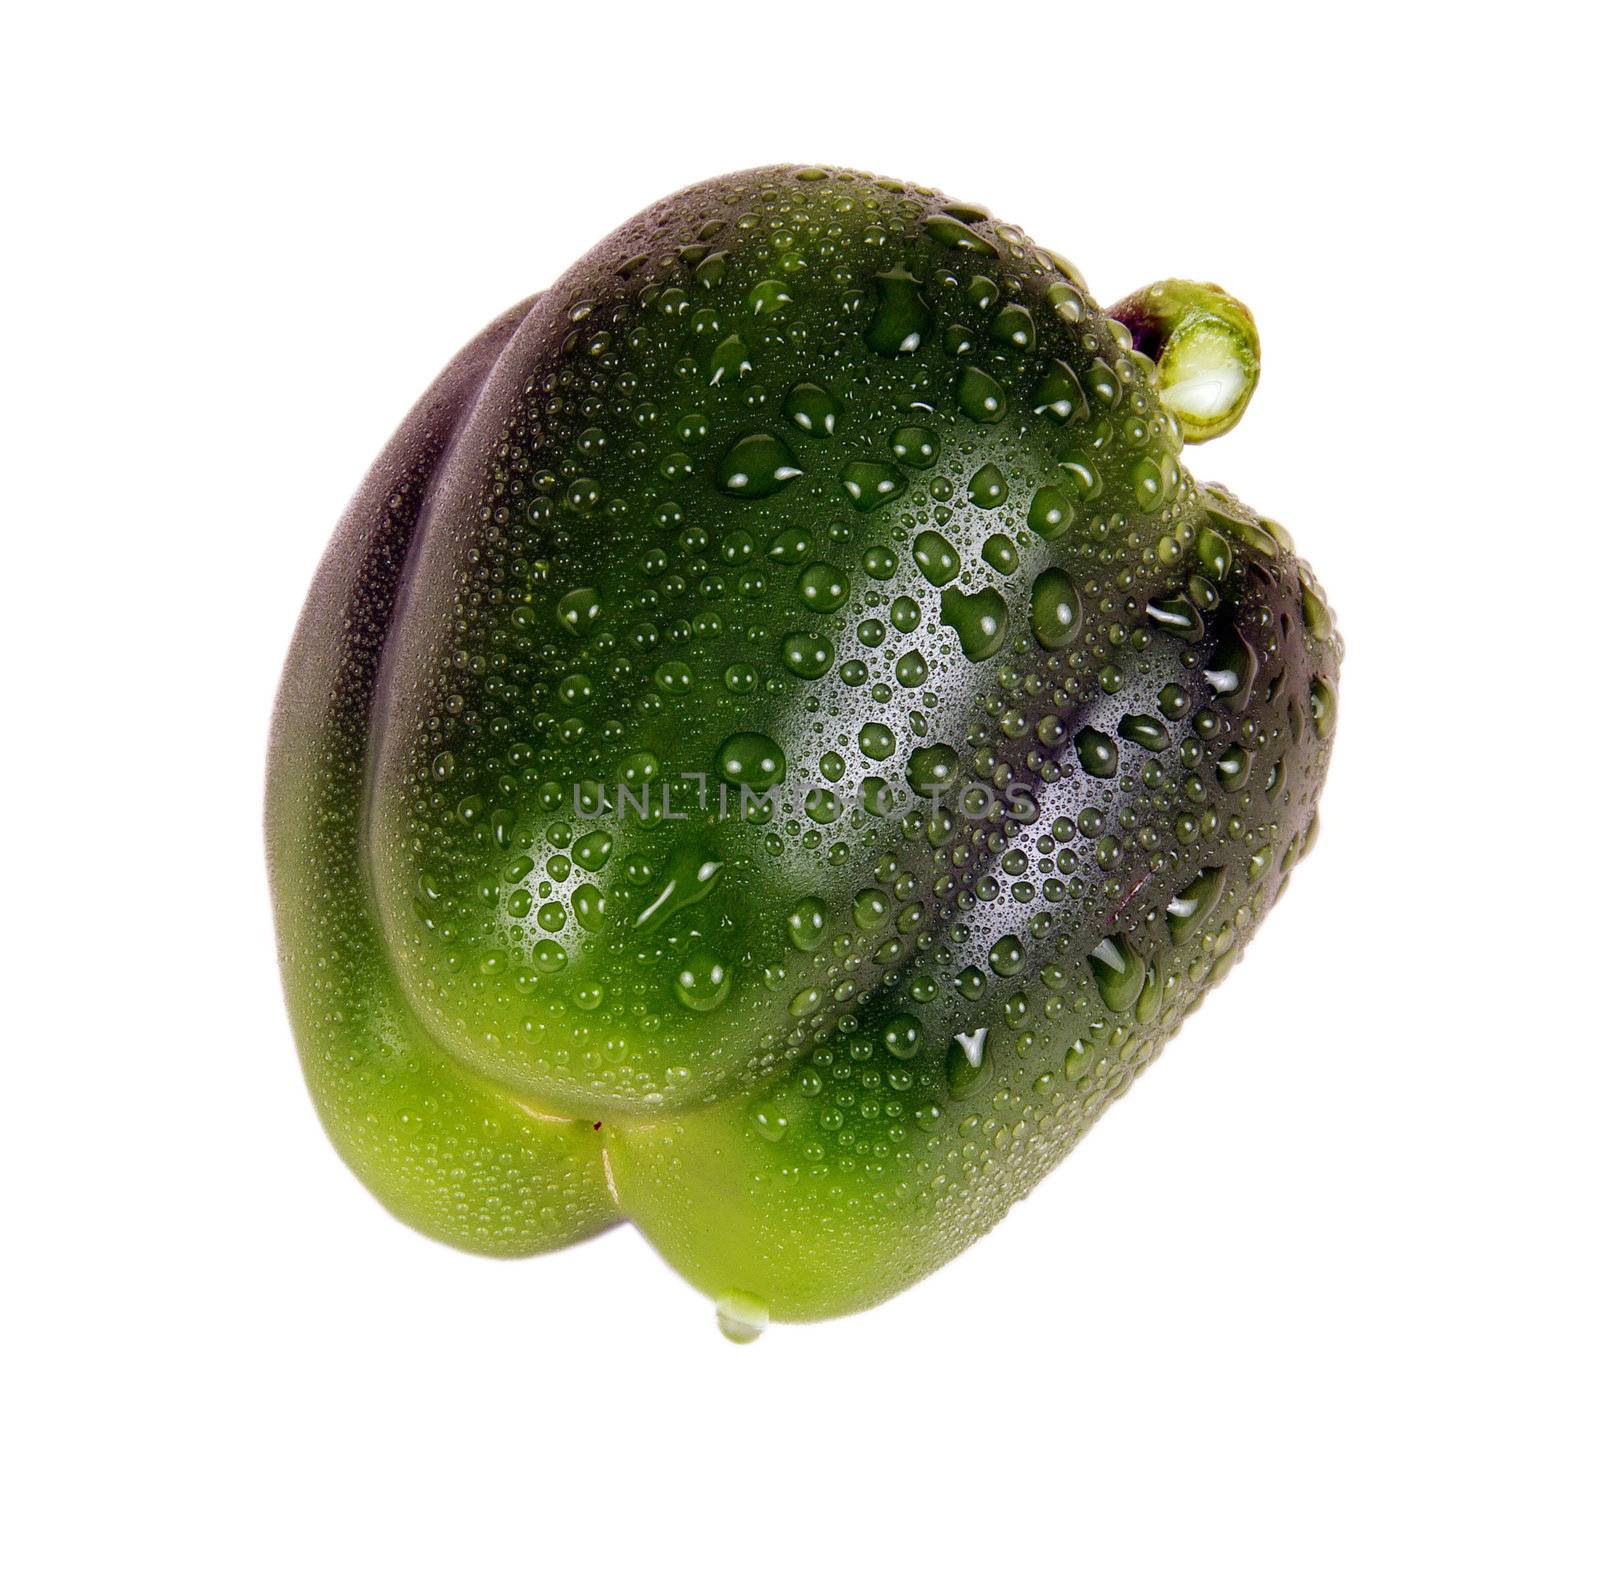 Pepper - very tasty and useful vegetable. It is used in kitchens of many people